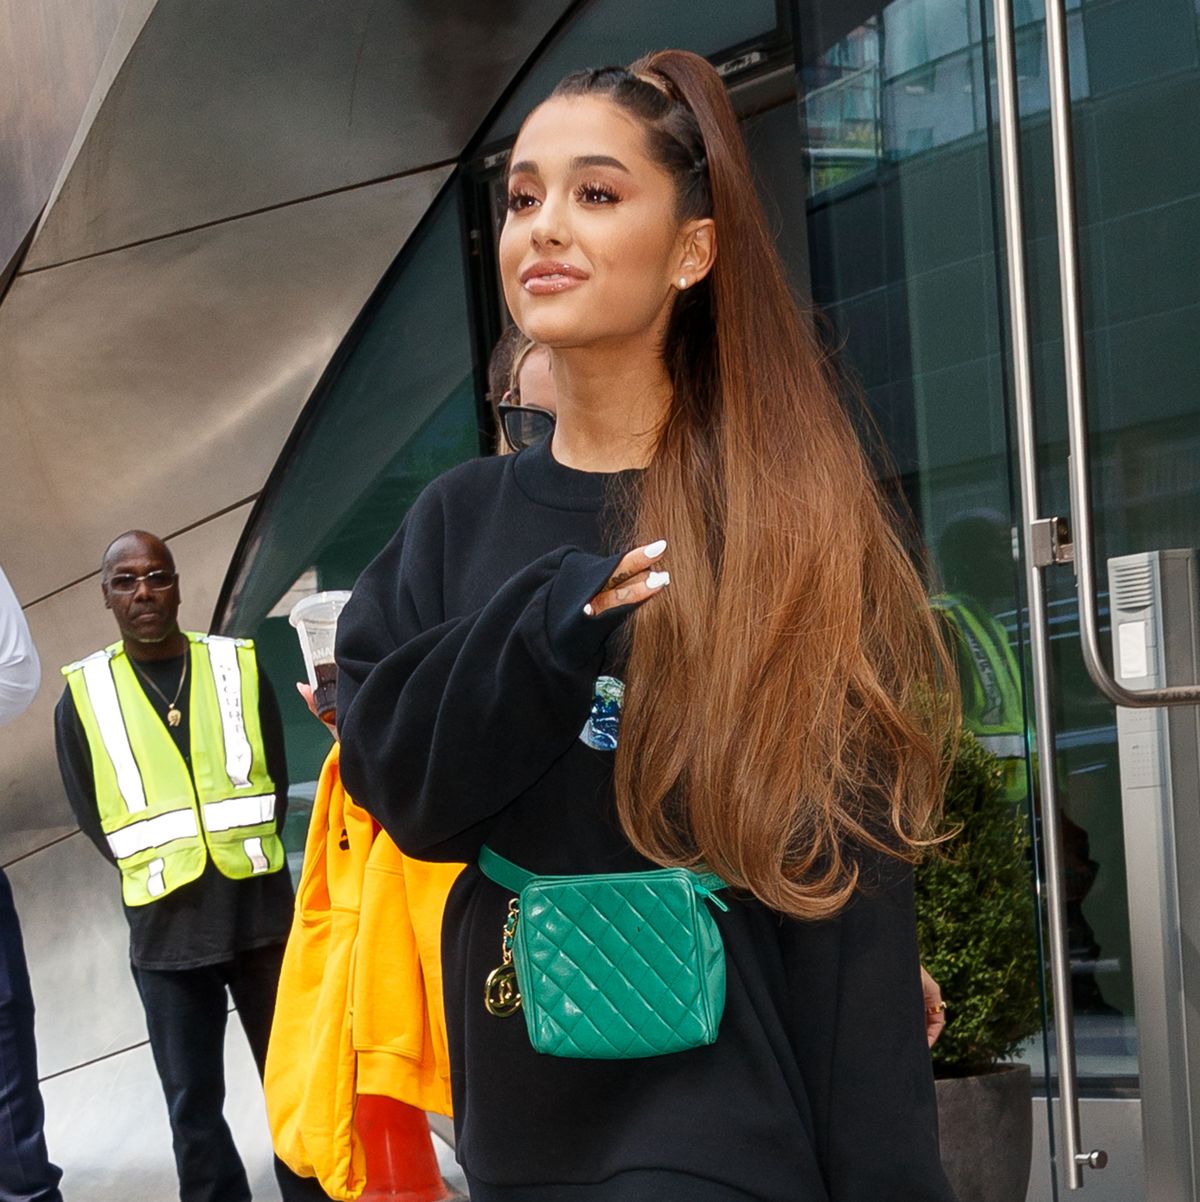 Go On Luxury Shopping Spree We'll Guess Fave Ariana Grande Album